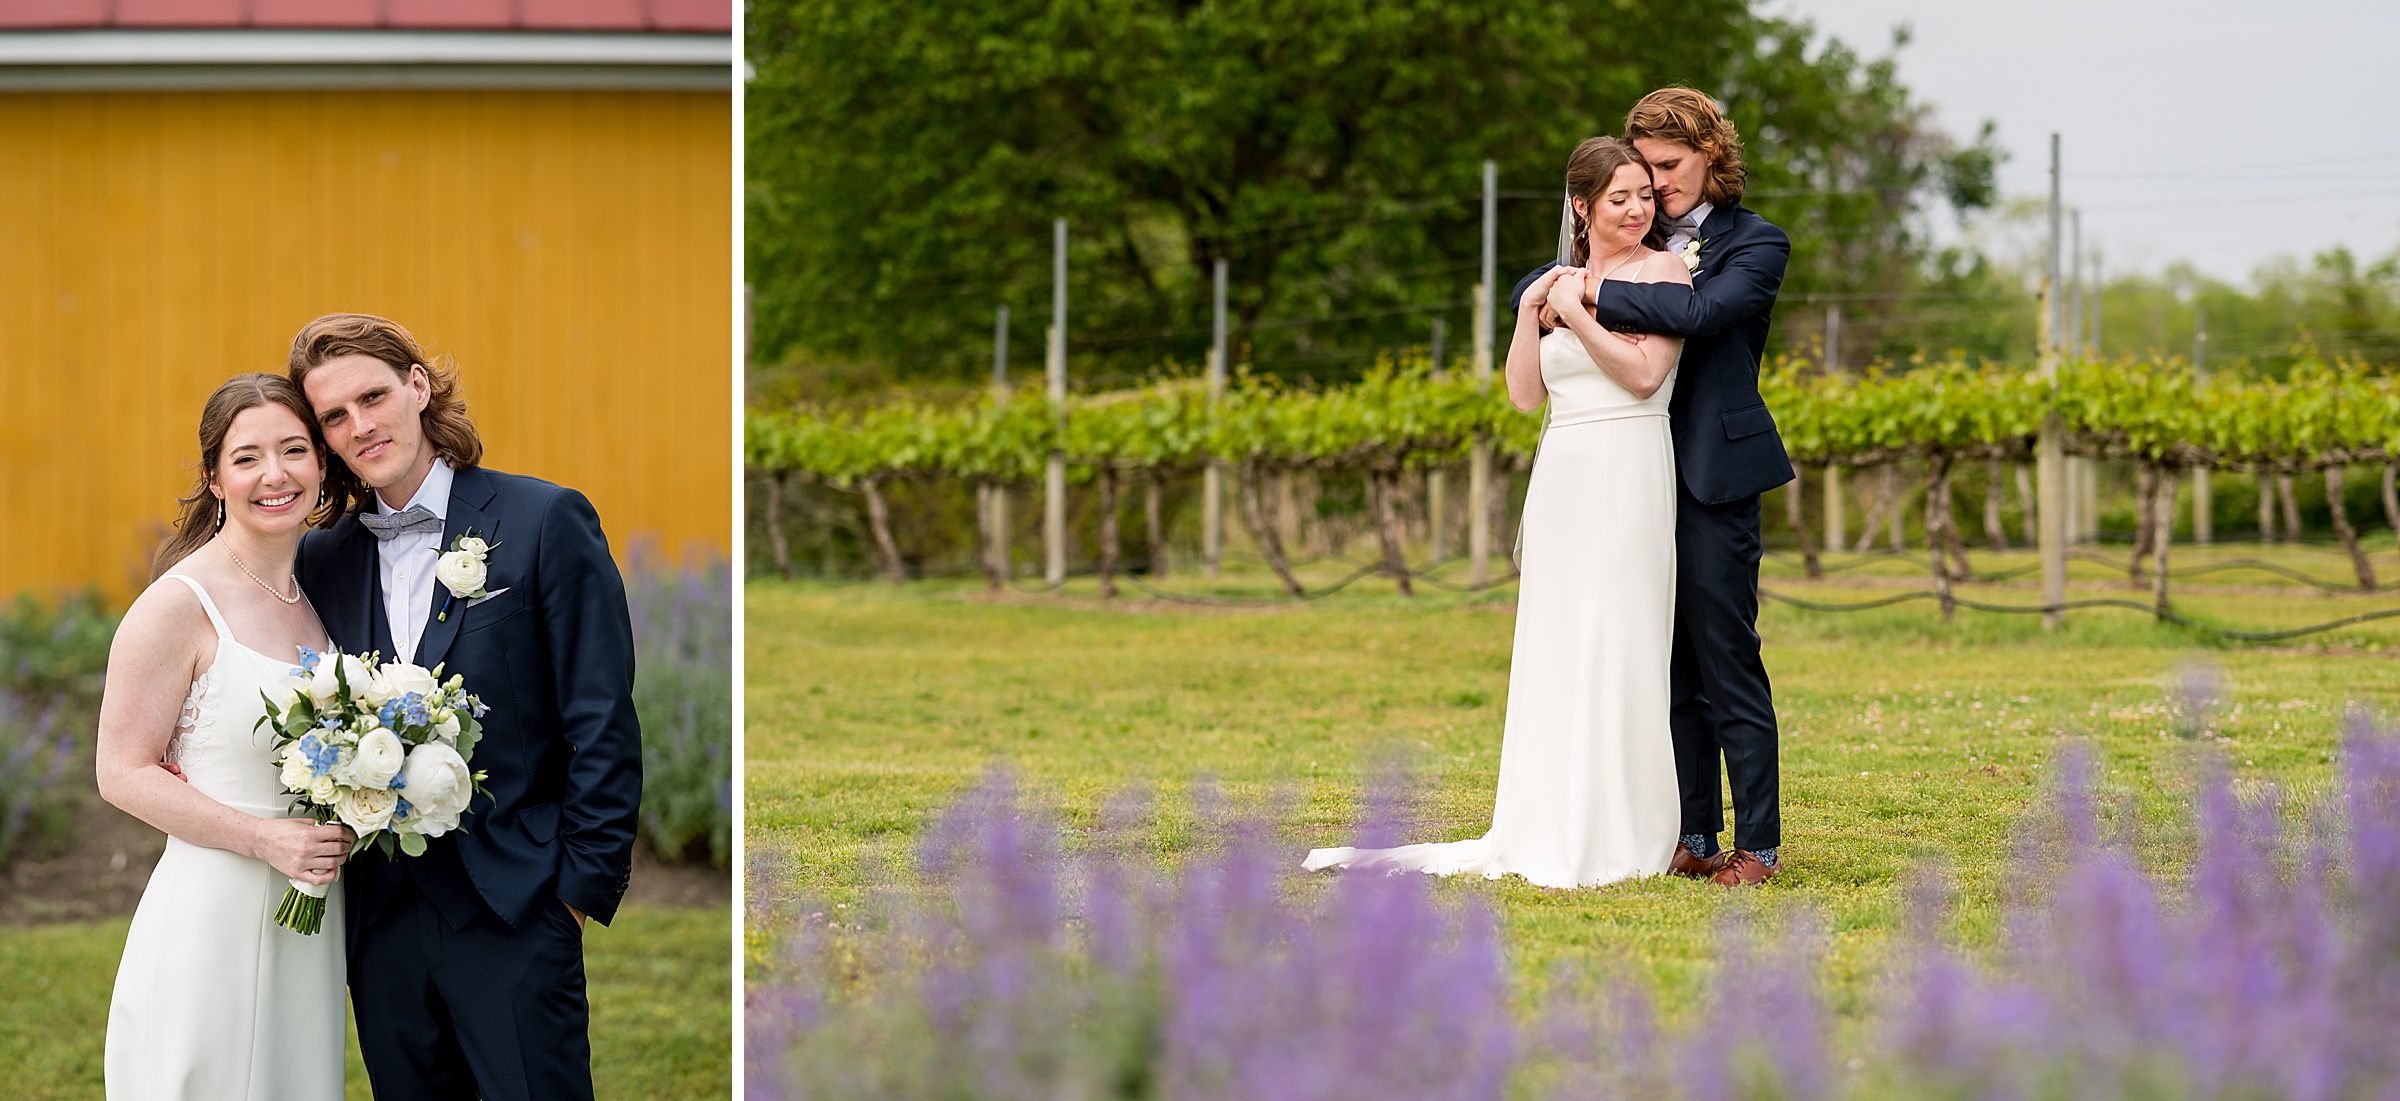 A bride and groom in wedding attire pose in a garden setting; the groom in a dark suit and the bride in a white gown. The left image shows them smiling, while the right shows an intimate embrace.